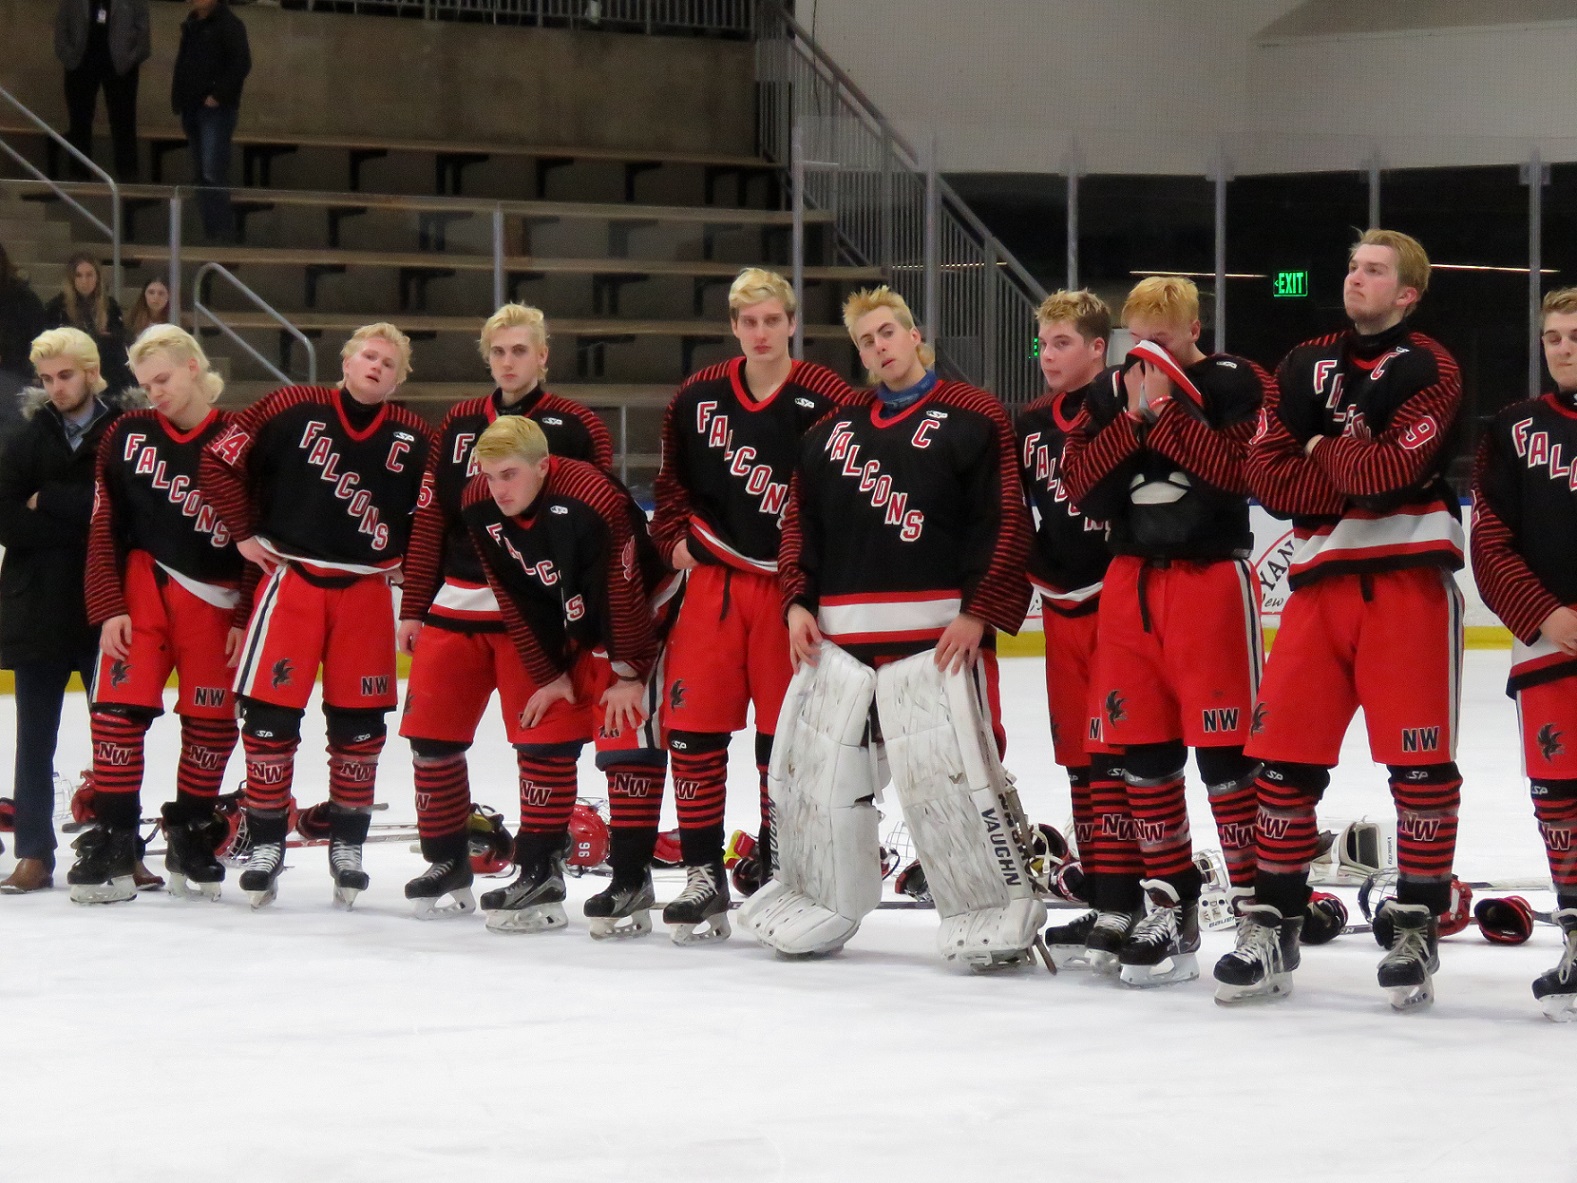 The Niagara-Wheatfield Falcons hockey team stands at the blue line following a 4-0 defeat versus Orchard Park in the Section VI large schools finals. (Photos by David Yarger)